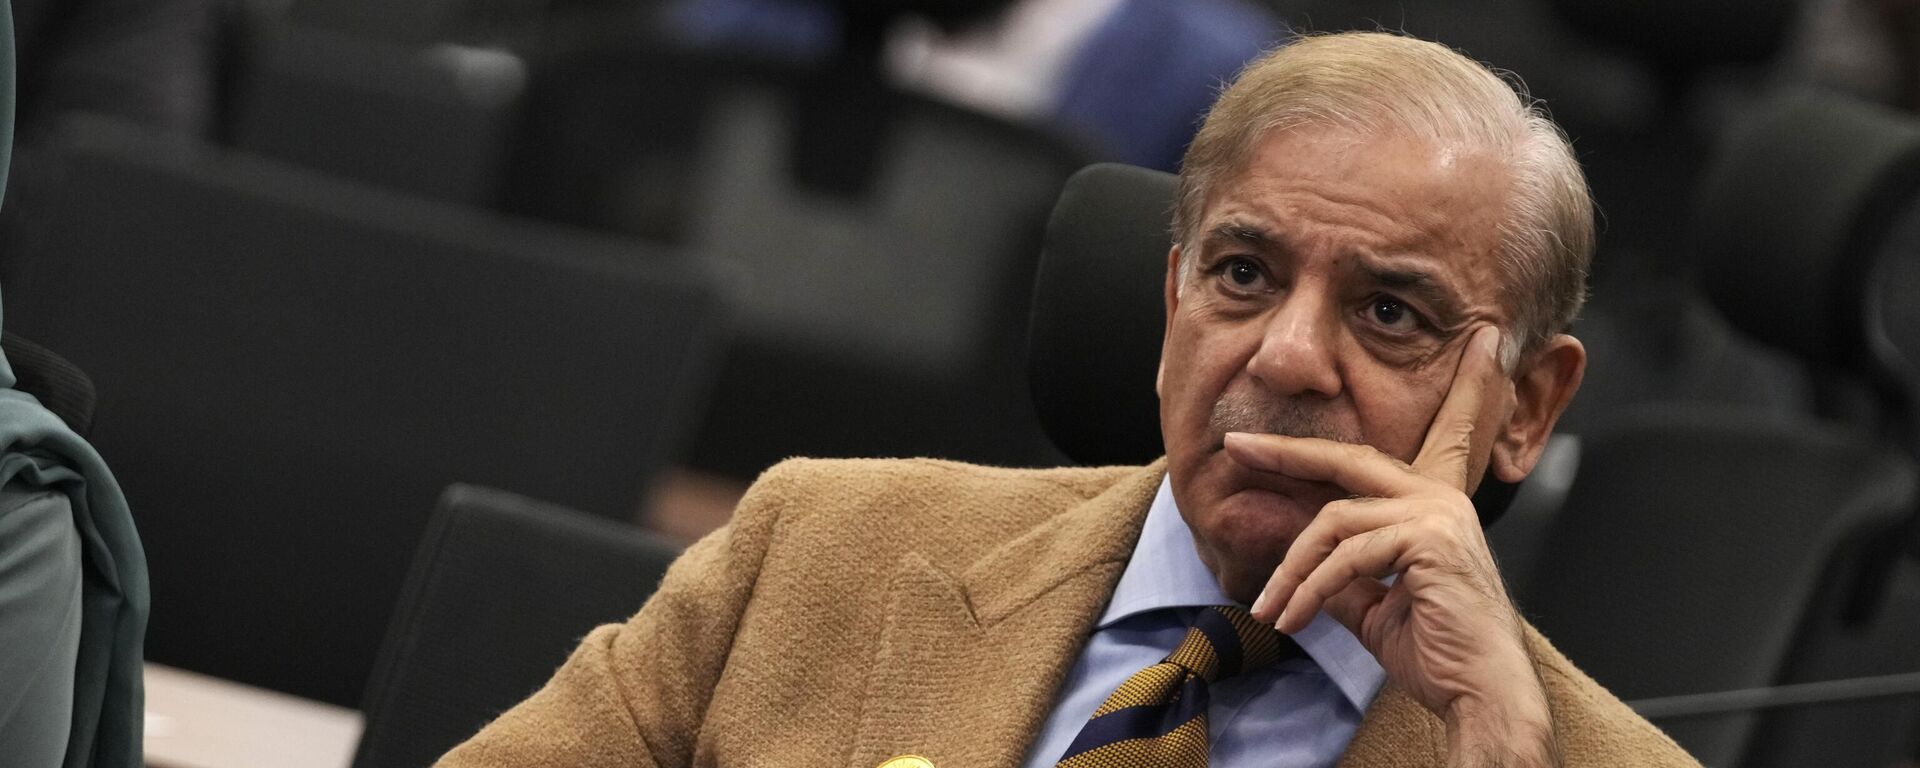 Muhammad Shehbaz Sharif, prime minister of Pakistan, listens to speeches at the COP27 UN Climate Summit, Tuesday, Nov. 8, 2022, in Sharm el-Sheikh, Egypt. - Sputnik India, 1920, 03.02.2023